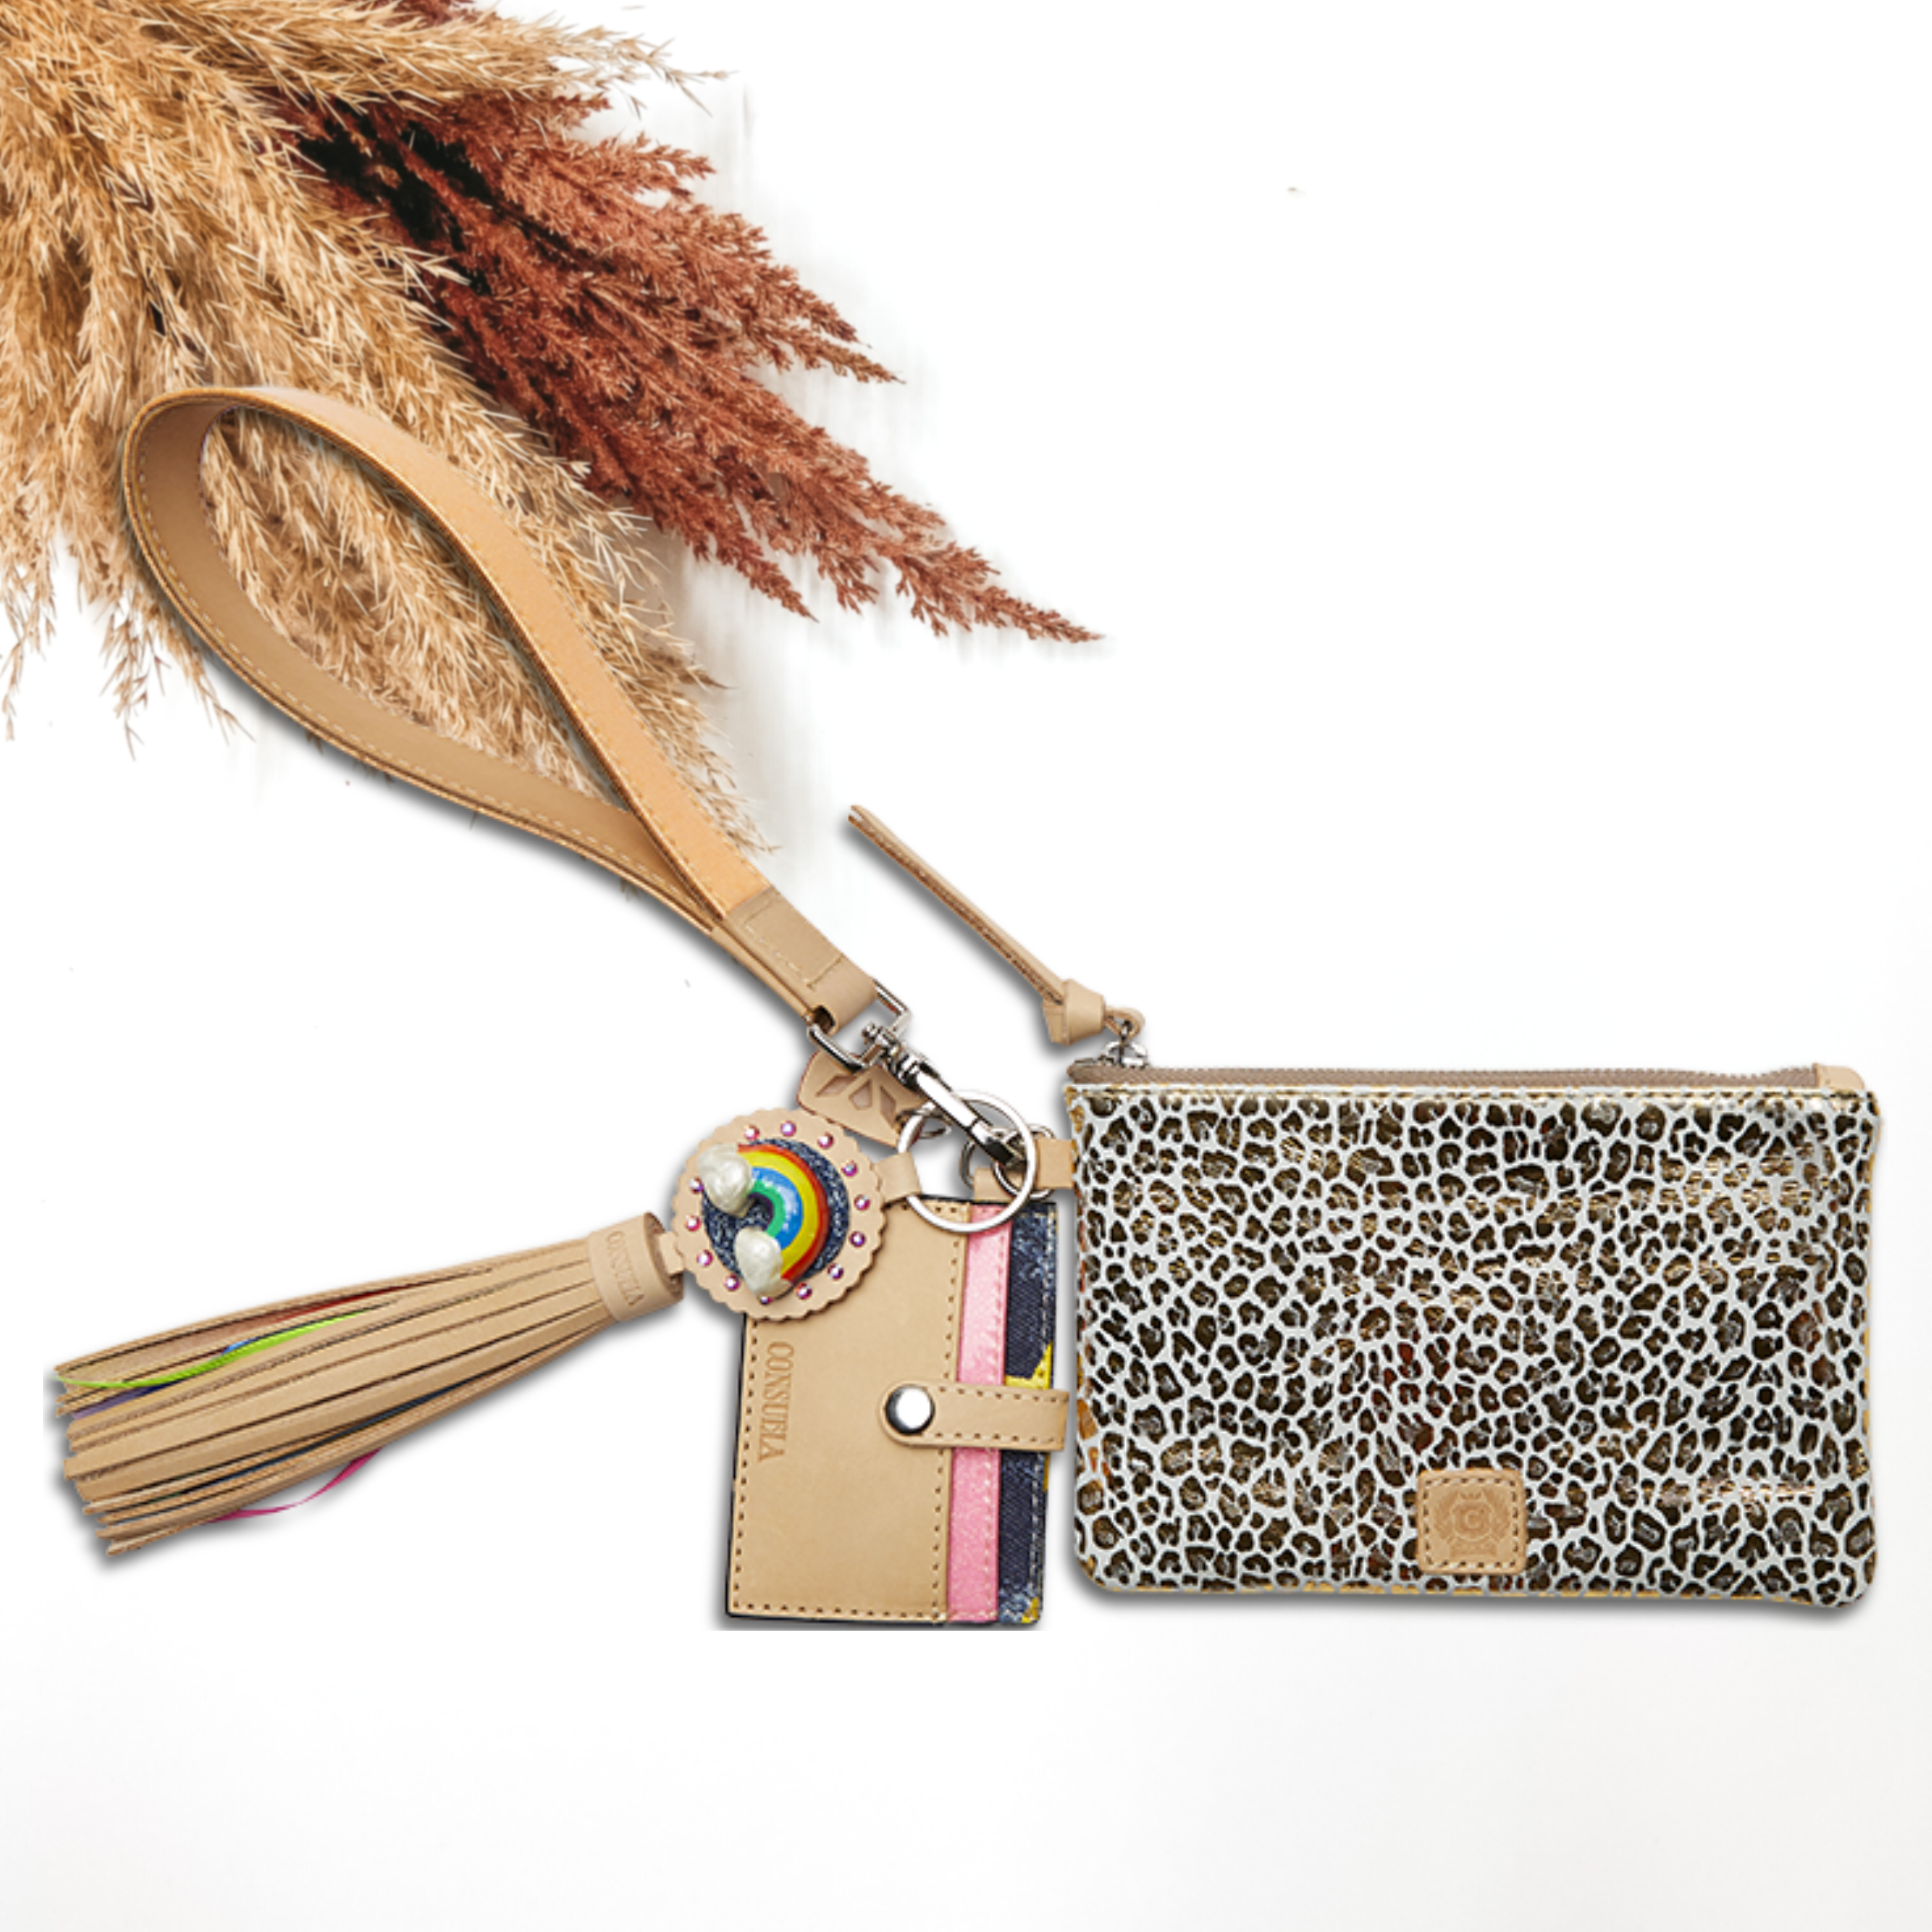 Pictured on a white background is a white and gold leopard print pouch with a light tan and light orange glitter wristlet. This pouch also includes a rainbow charm, light tan tassel on the zipper, and a card holder keychain.